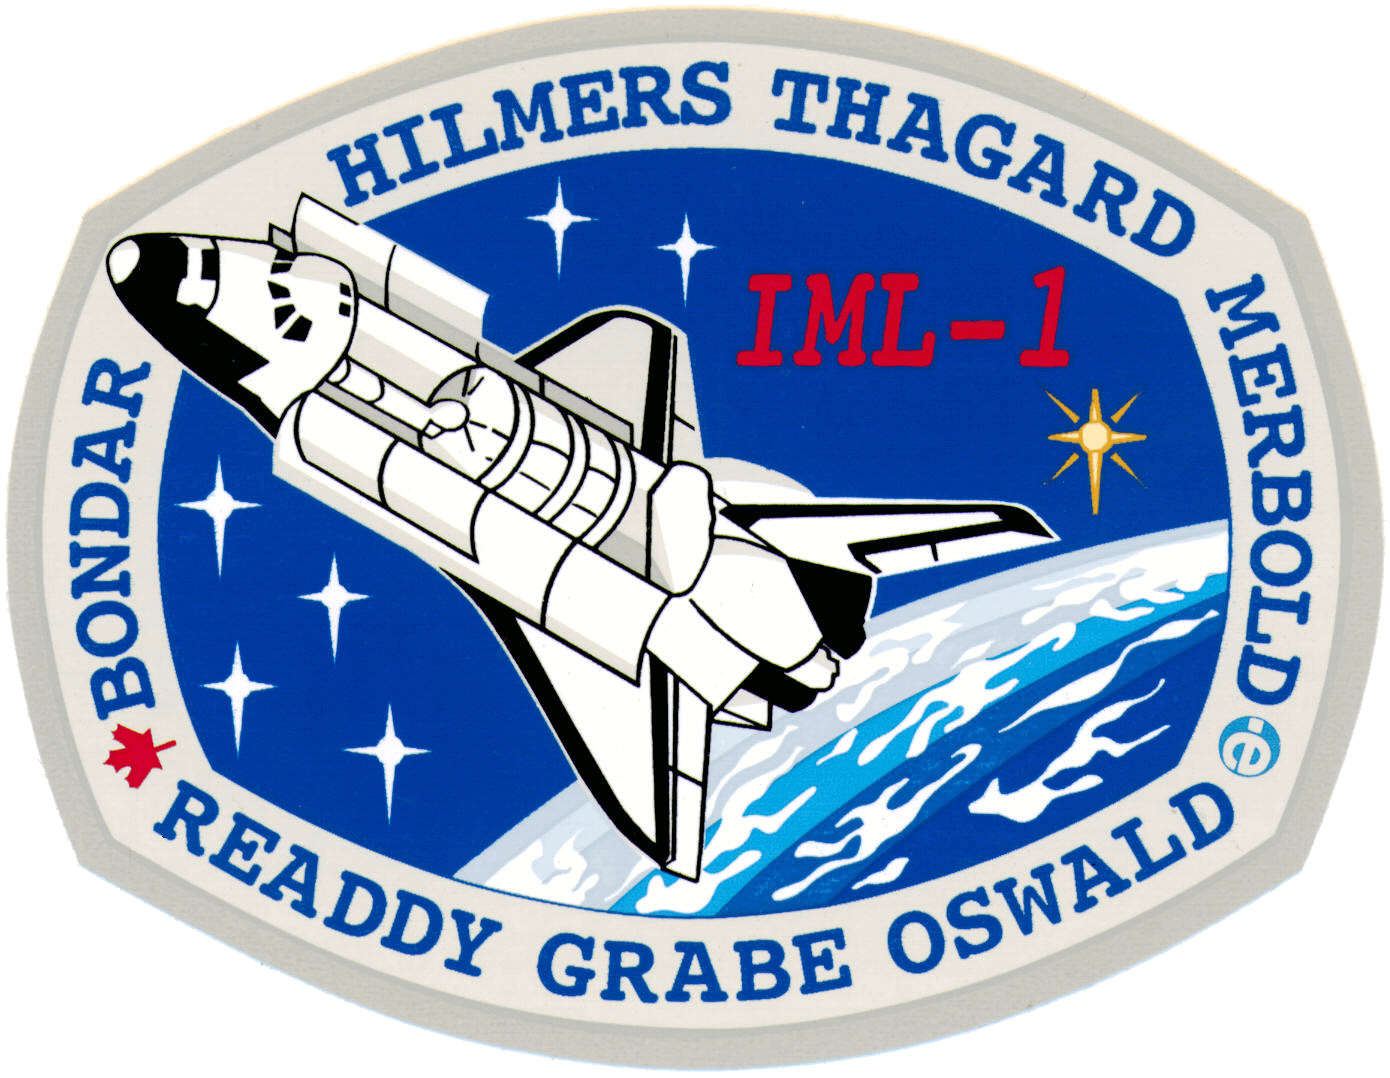 Mission patch for STS-42